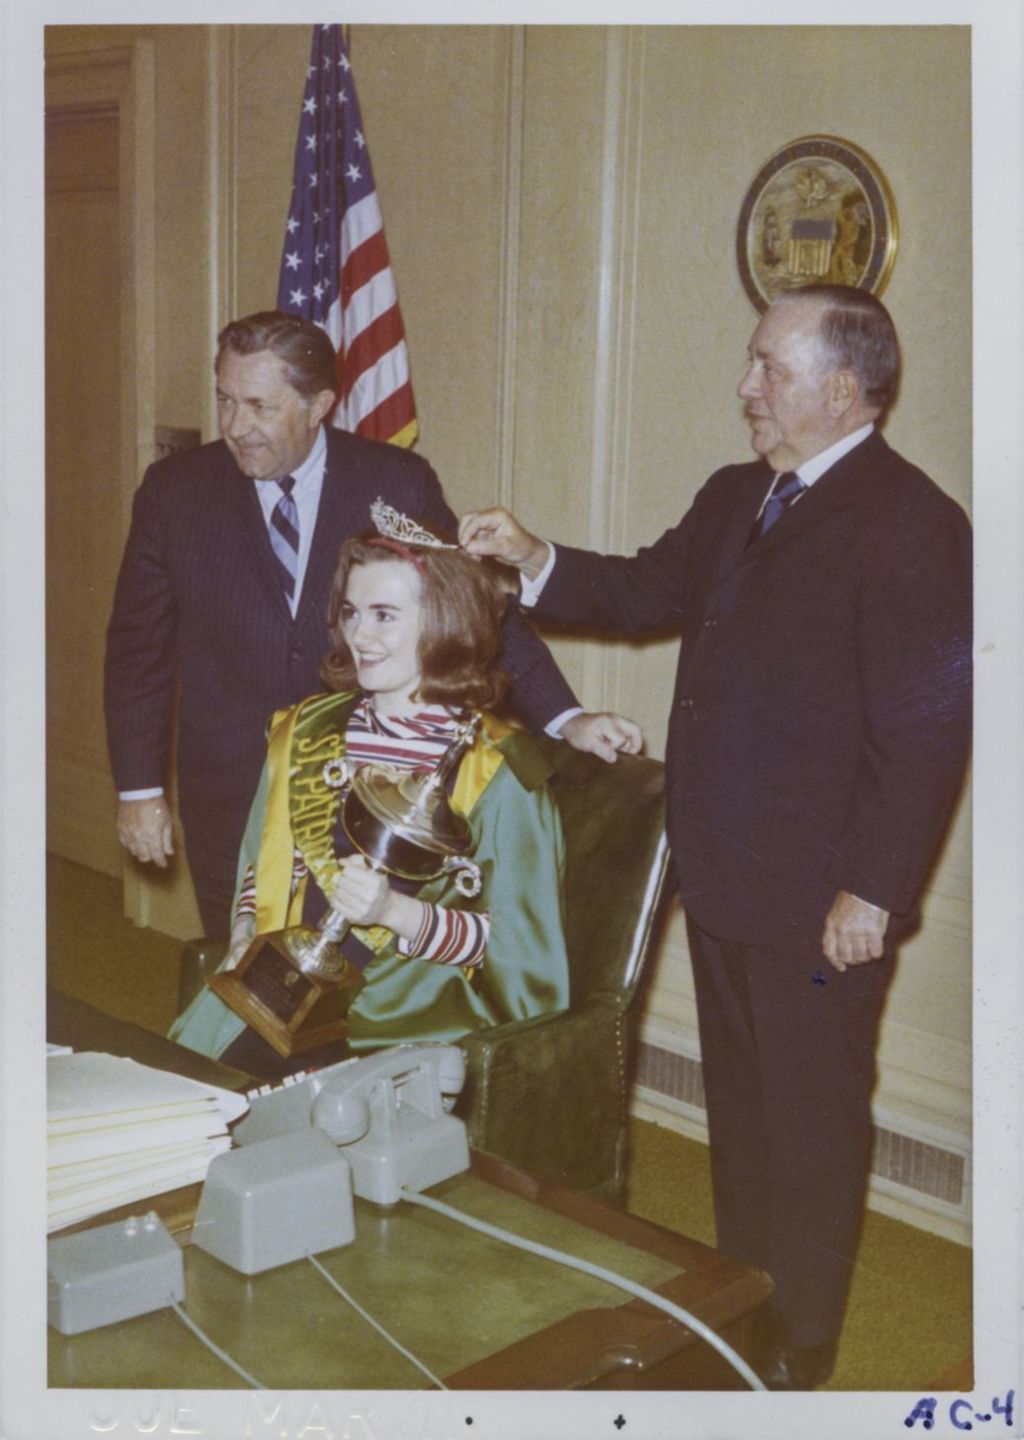 Richard J. Daley with a St. Patrick's Day Queen in his office chair